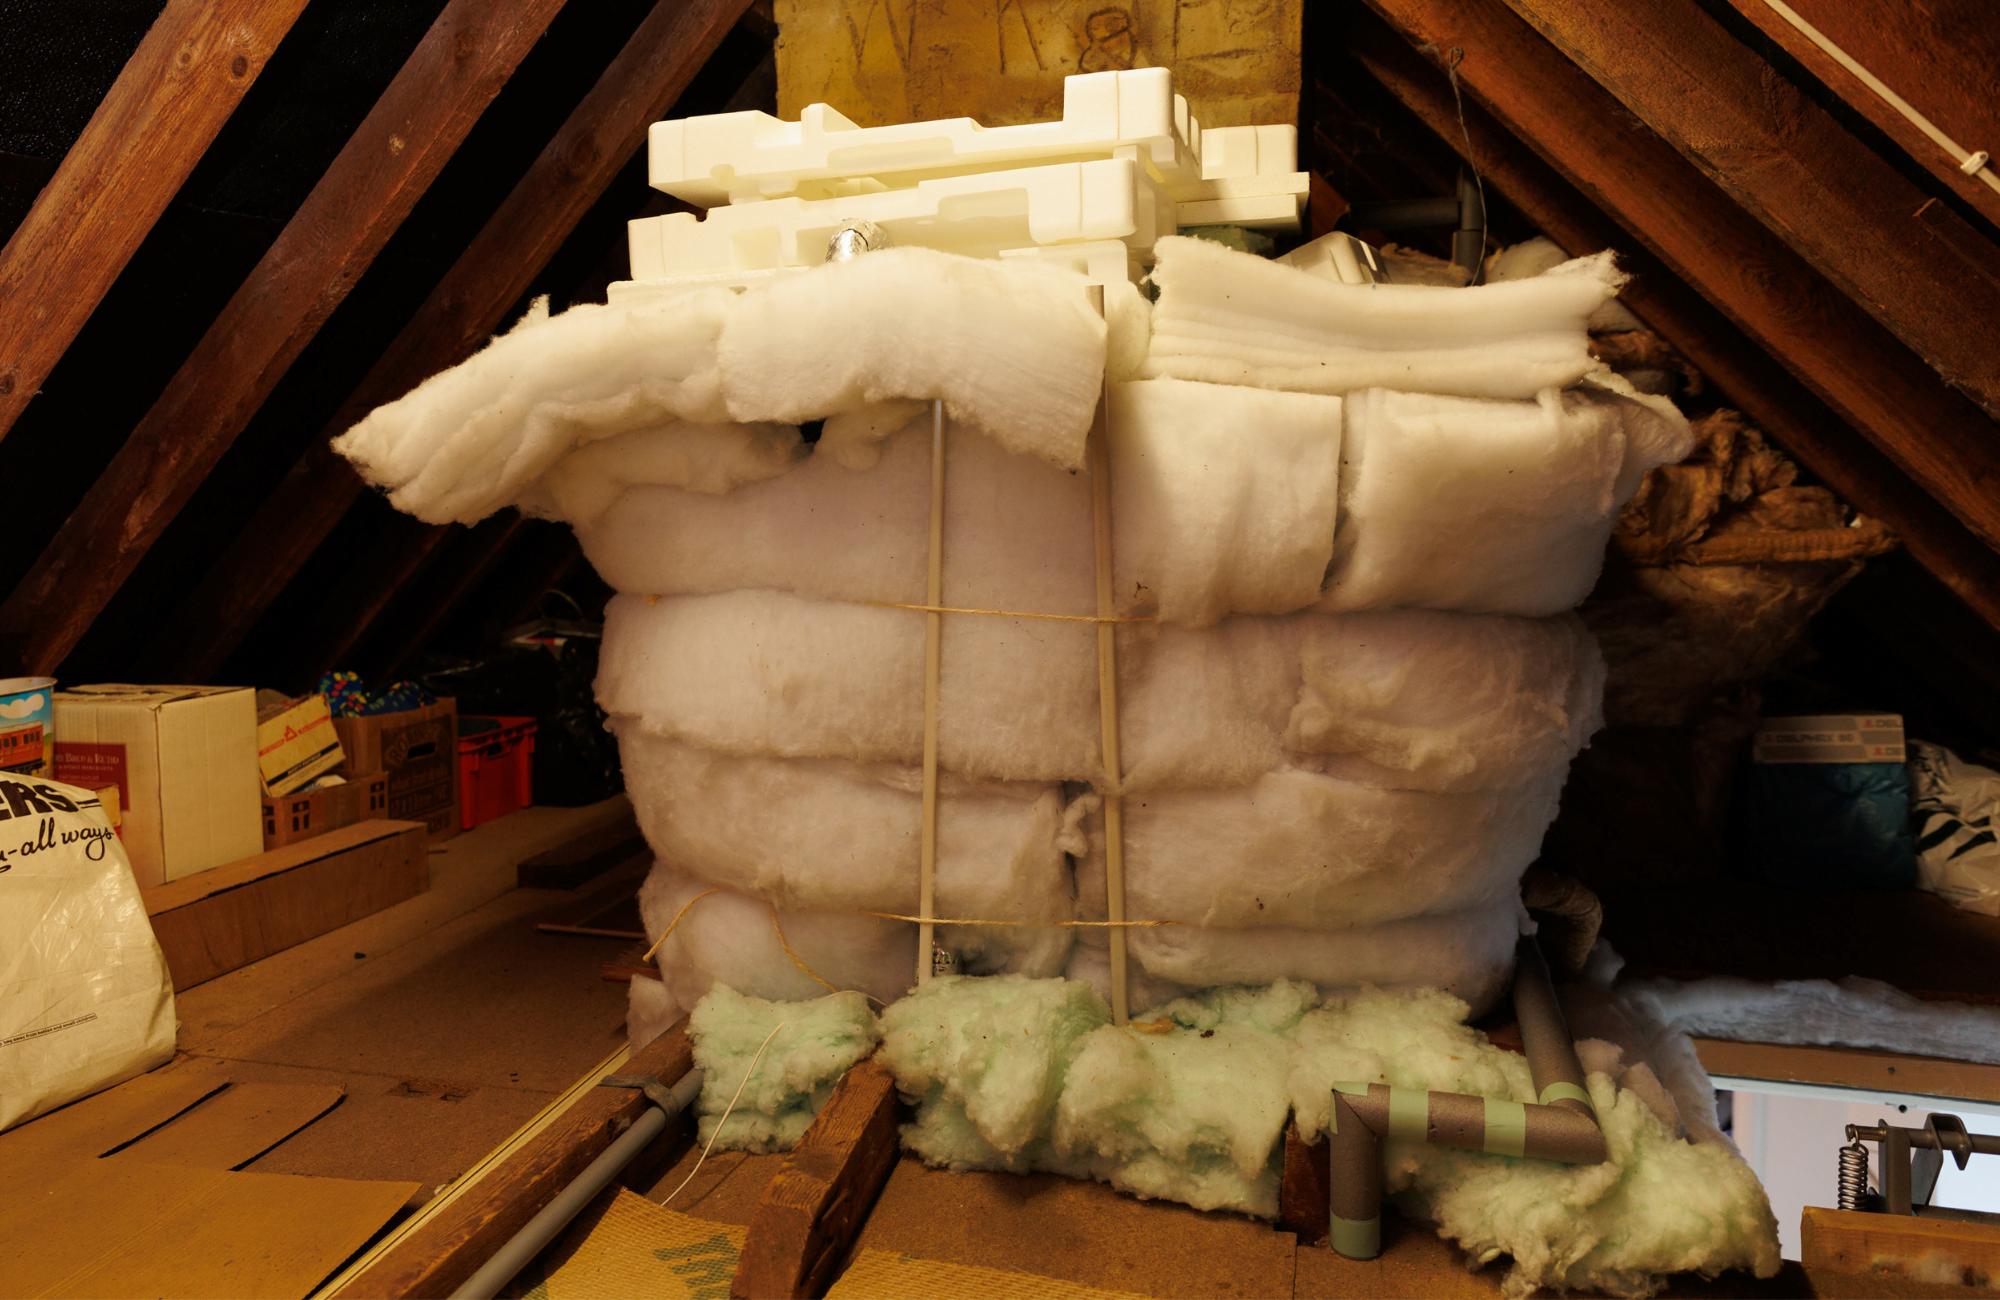 An self-build insulated water tank in an attic.